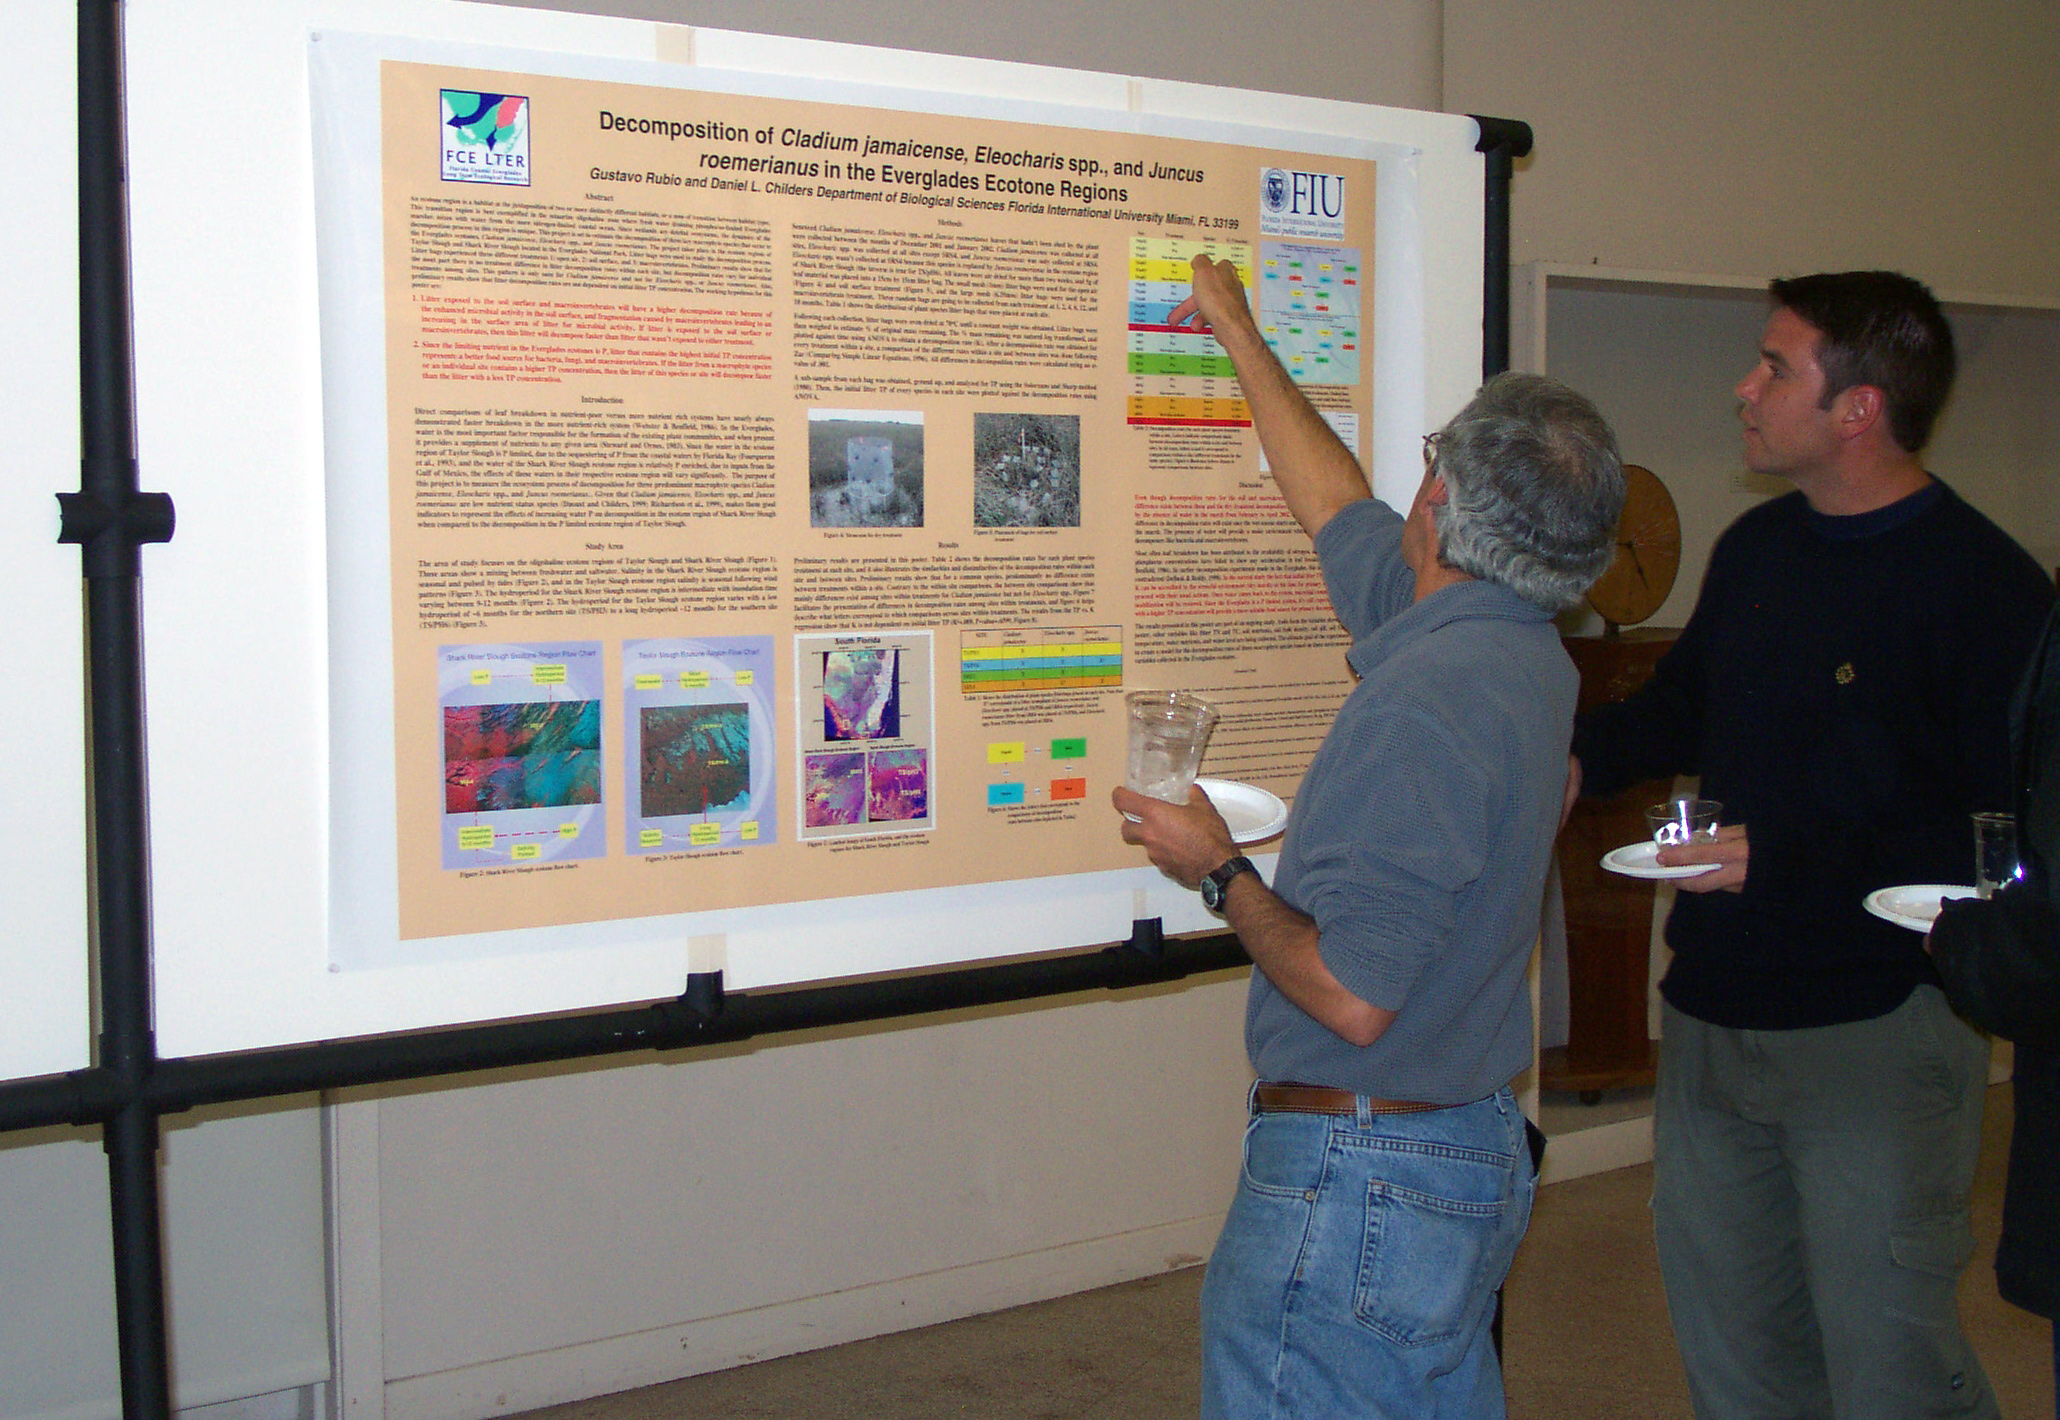 David Rudnick (L) and Gustavo Rubio (R) discussing Gustavo's poster at the 2003 Florida Coastal Everglades LTER All Scientists Meeting